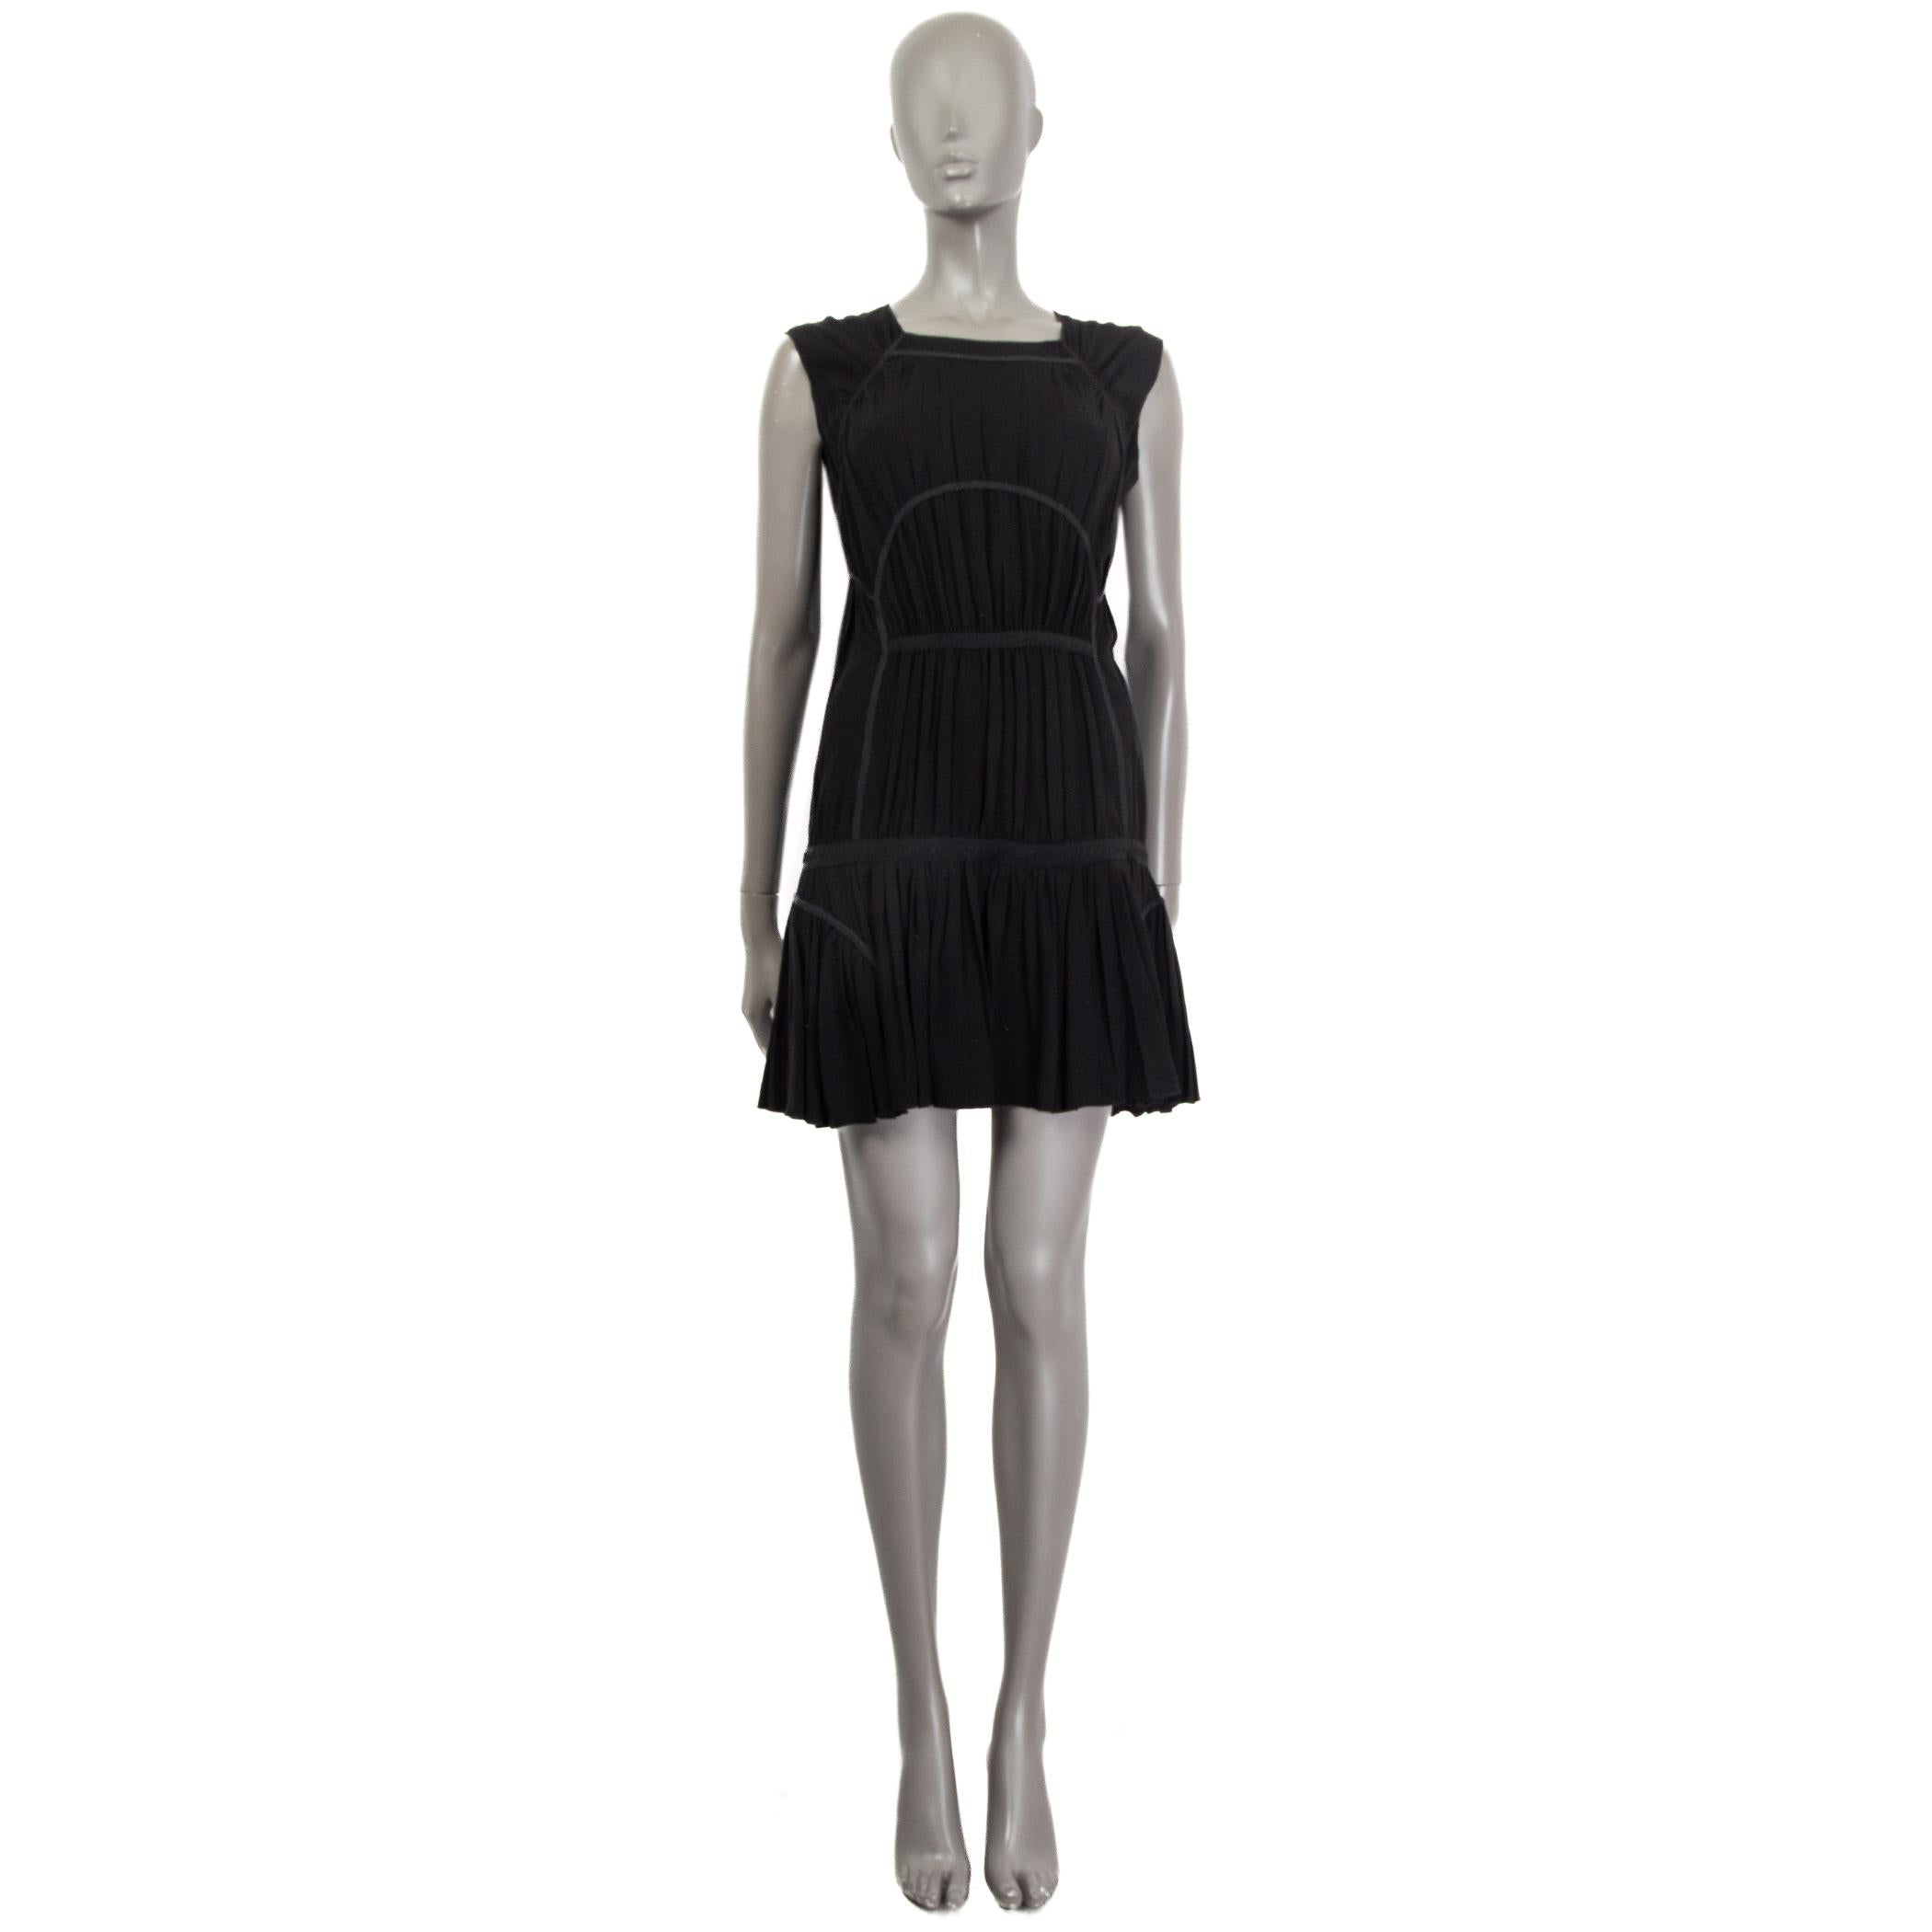 100% authentic Prada sleeveless panelled dress in black acetate (78%) and polyester (22%). Features gathering and cap sleeves. Unlined. Has been worn and is in excellent condition.

Measurements
Tag Size	38
Size	XS
Bust	76cm (29.6in) to 104cm